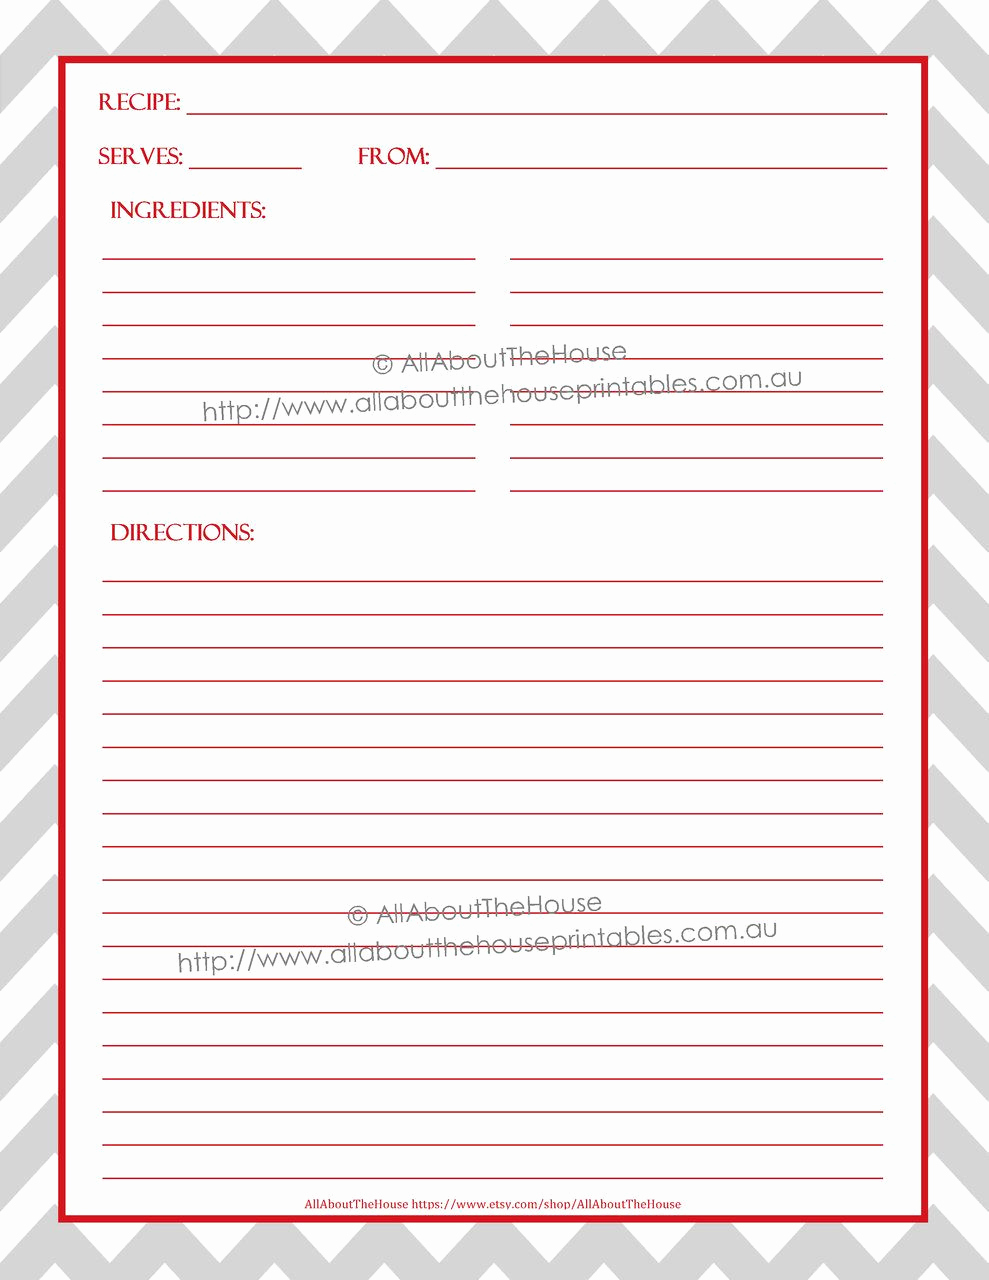 Full Page Recipe Template Editable Awesome Printable Recipe Binder Cover Editable Recipe Sheet